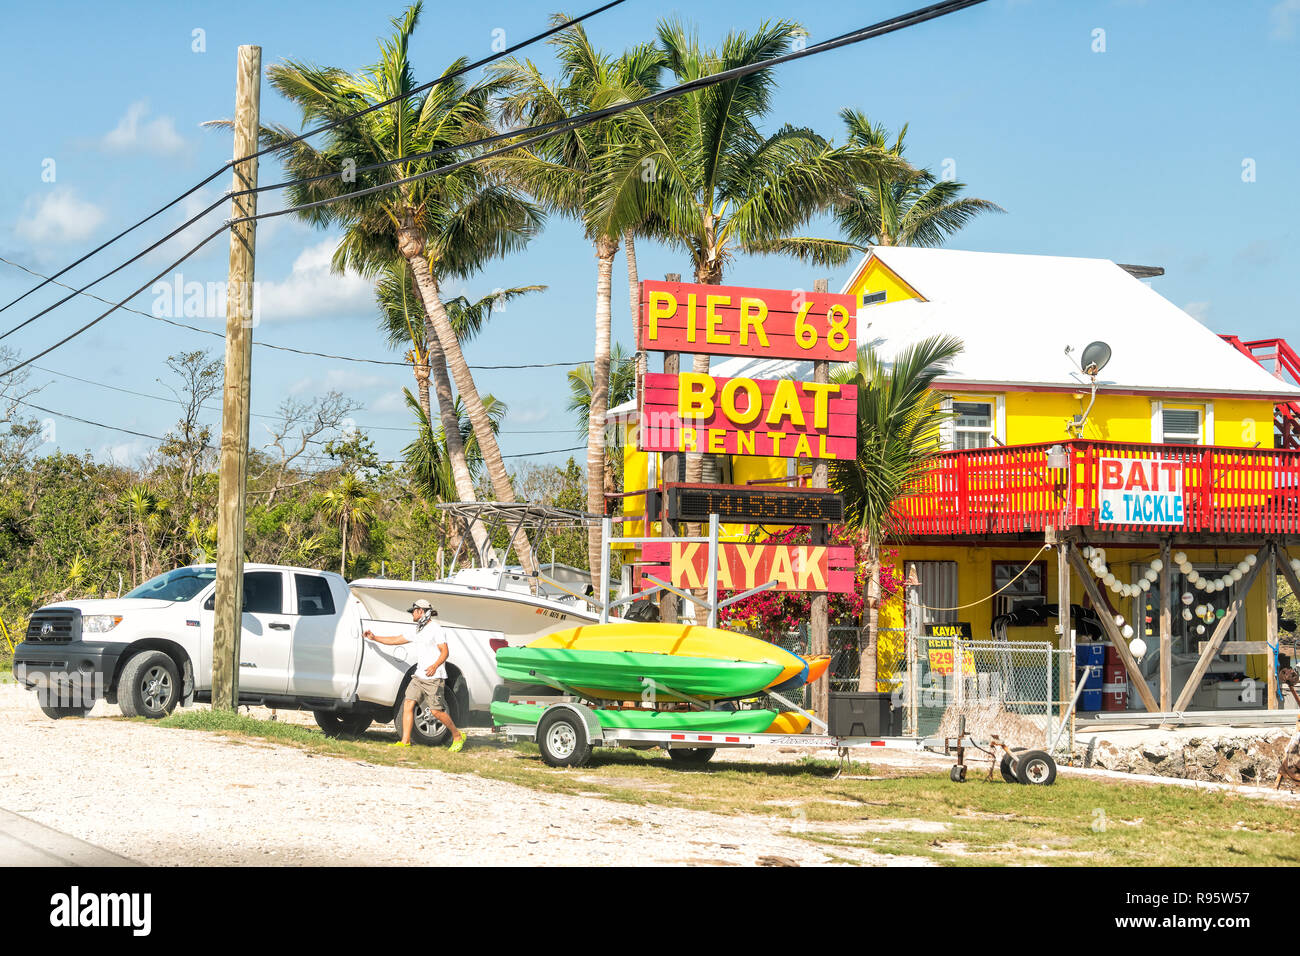 https://c8.alamy.com/comp/R95W57/layton-usa-may-1-2018-sign-for-pier-68-rental-kayak-bait-and-tackle-services-shop-store-in-florida-long-key-at-overseas-highway-road-street-R95W57.jpg